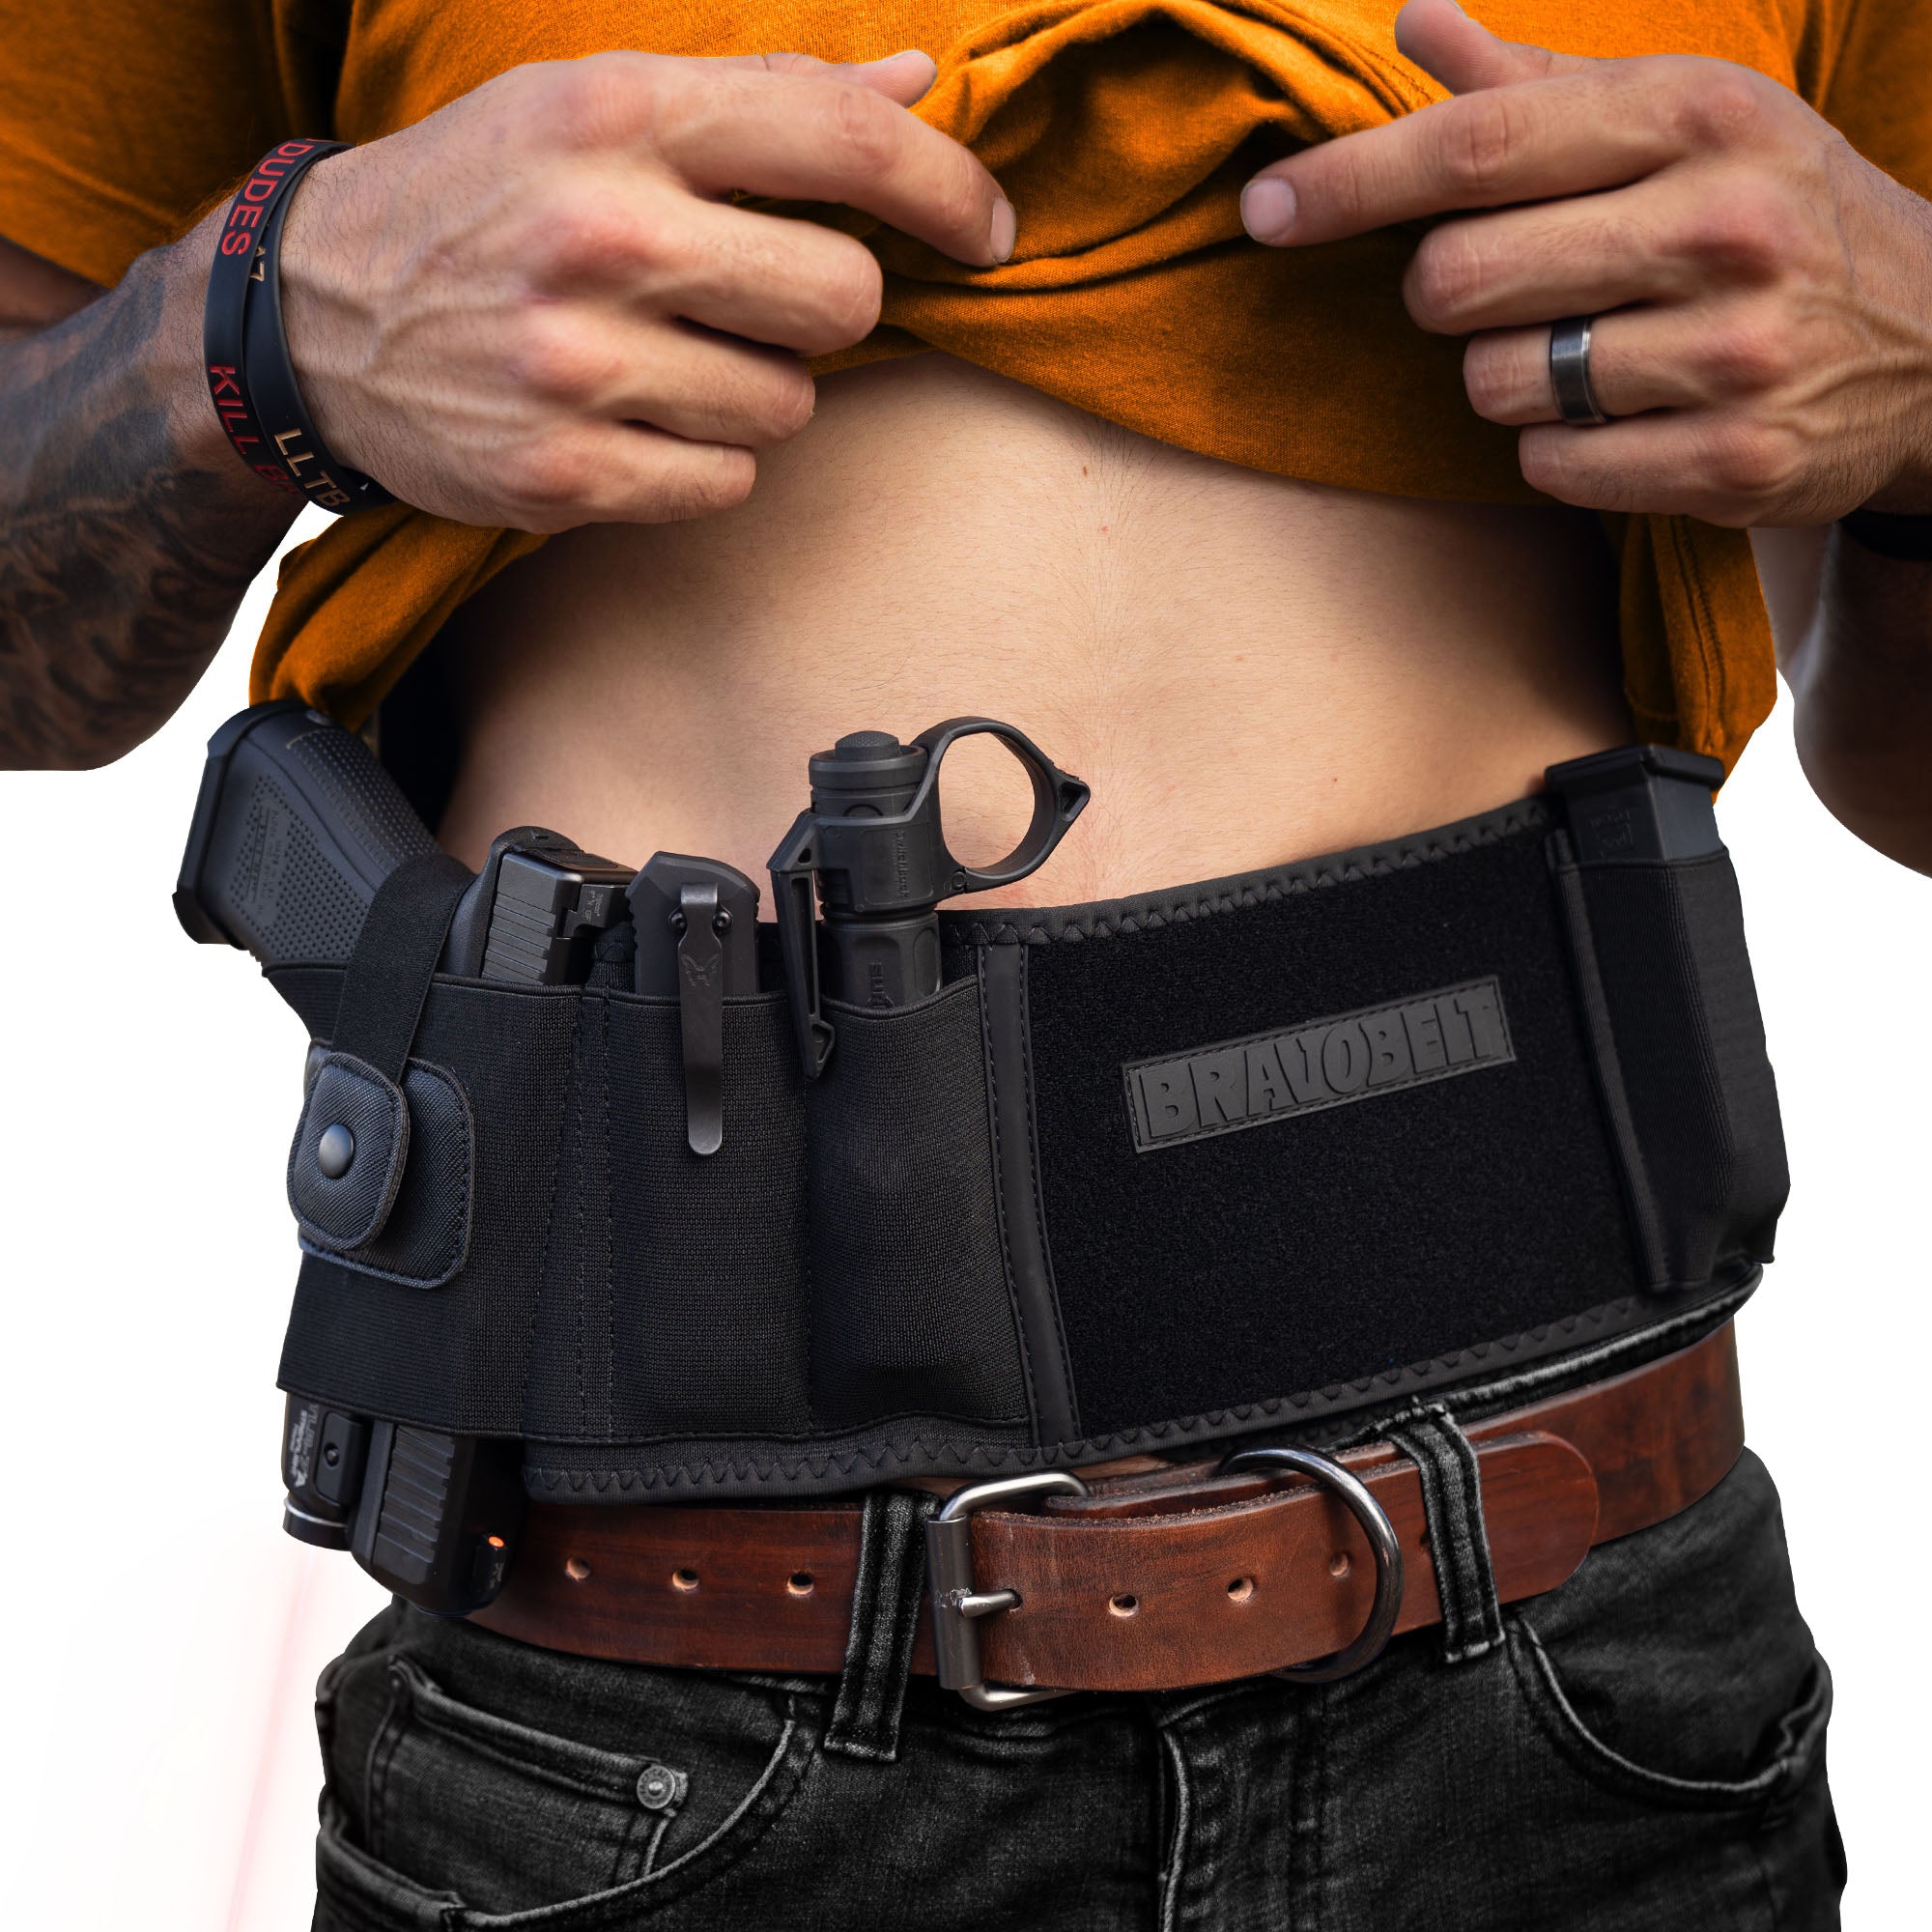 Strapt Tac Belly Band Holster | Shop Now | Free Shipping in US